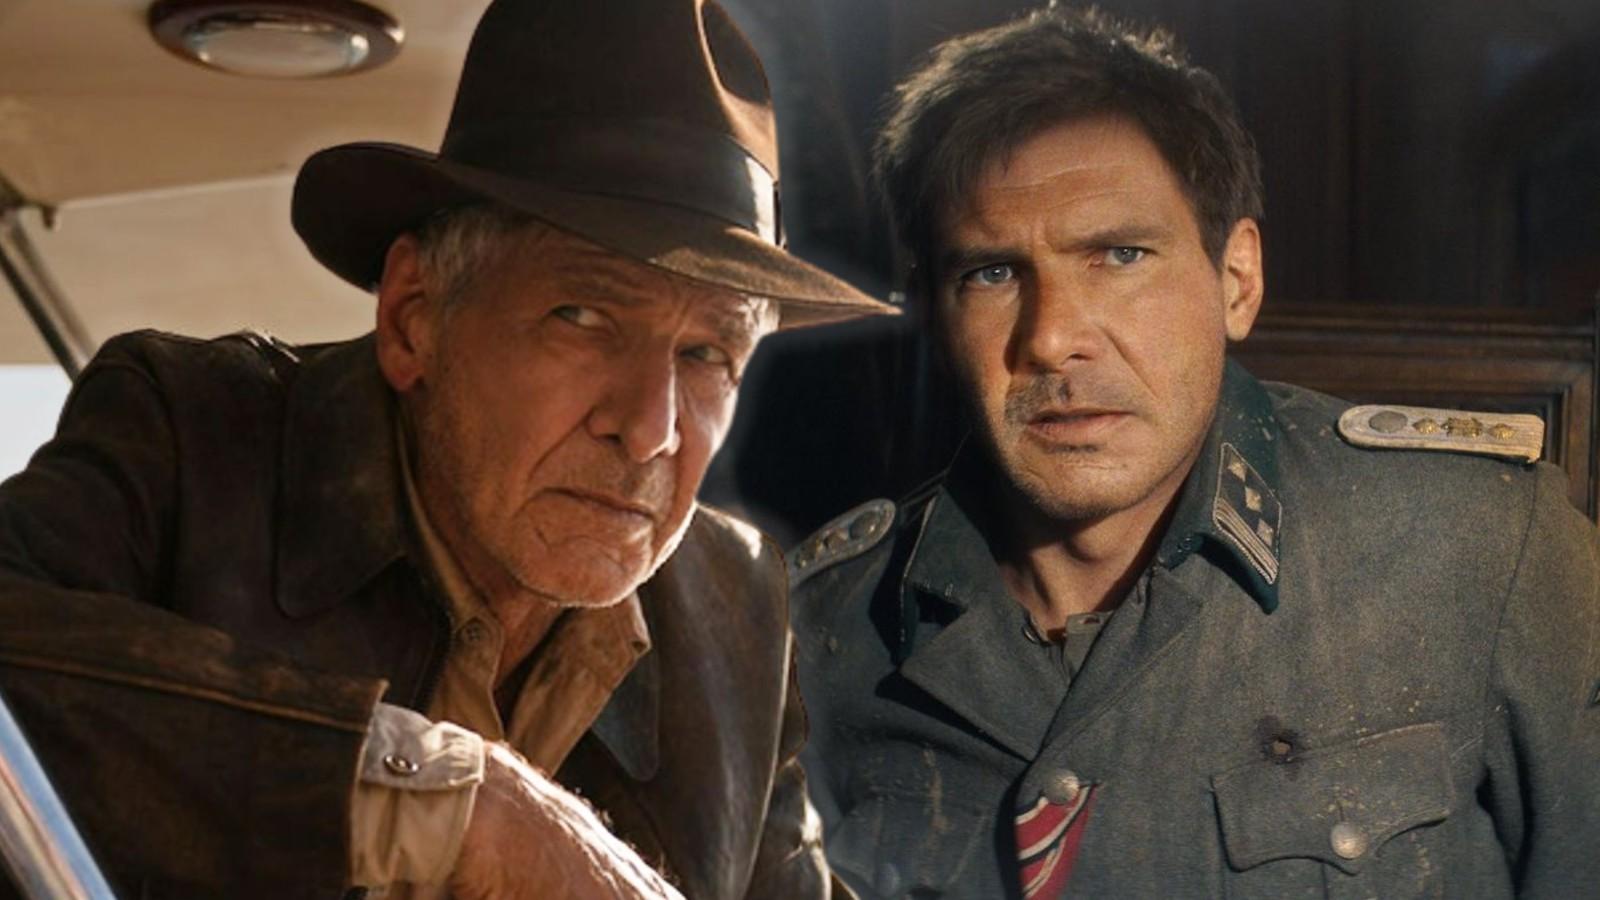 Indiana Jones 5' Reveals New Trailer and Title: 'The Dial of Destiny